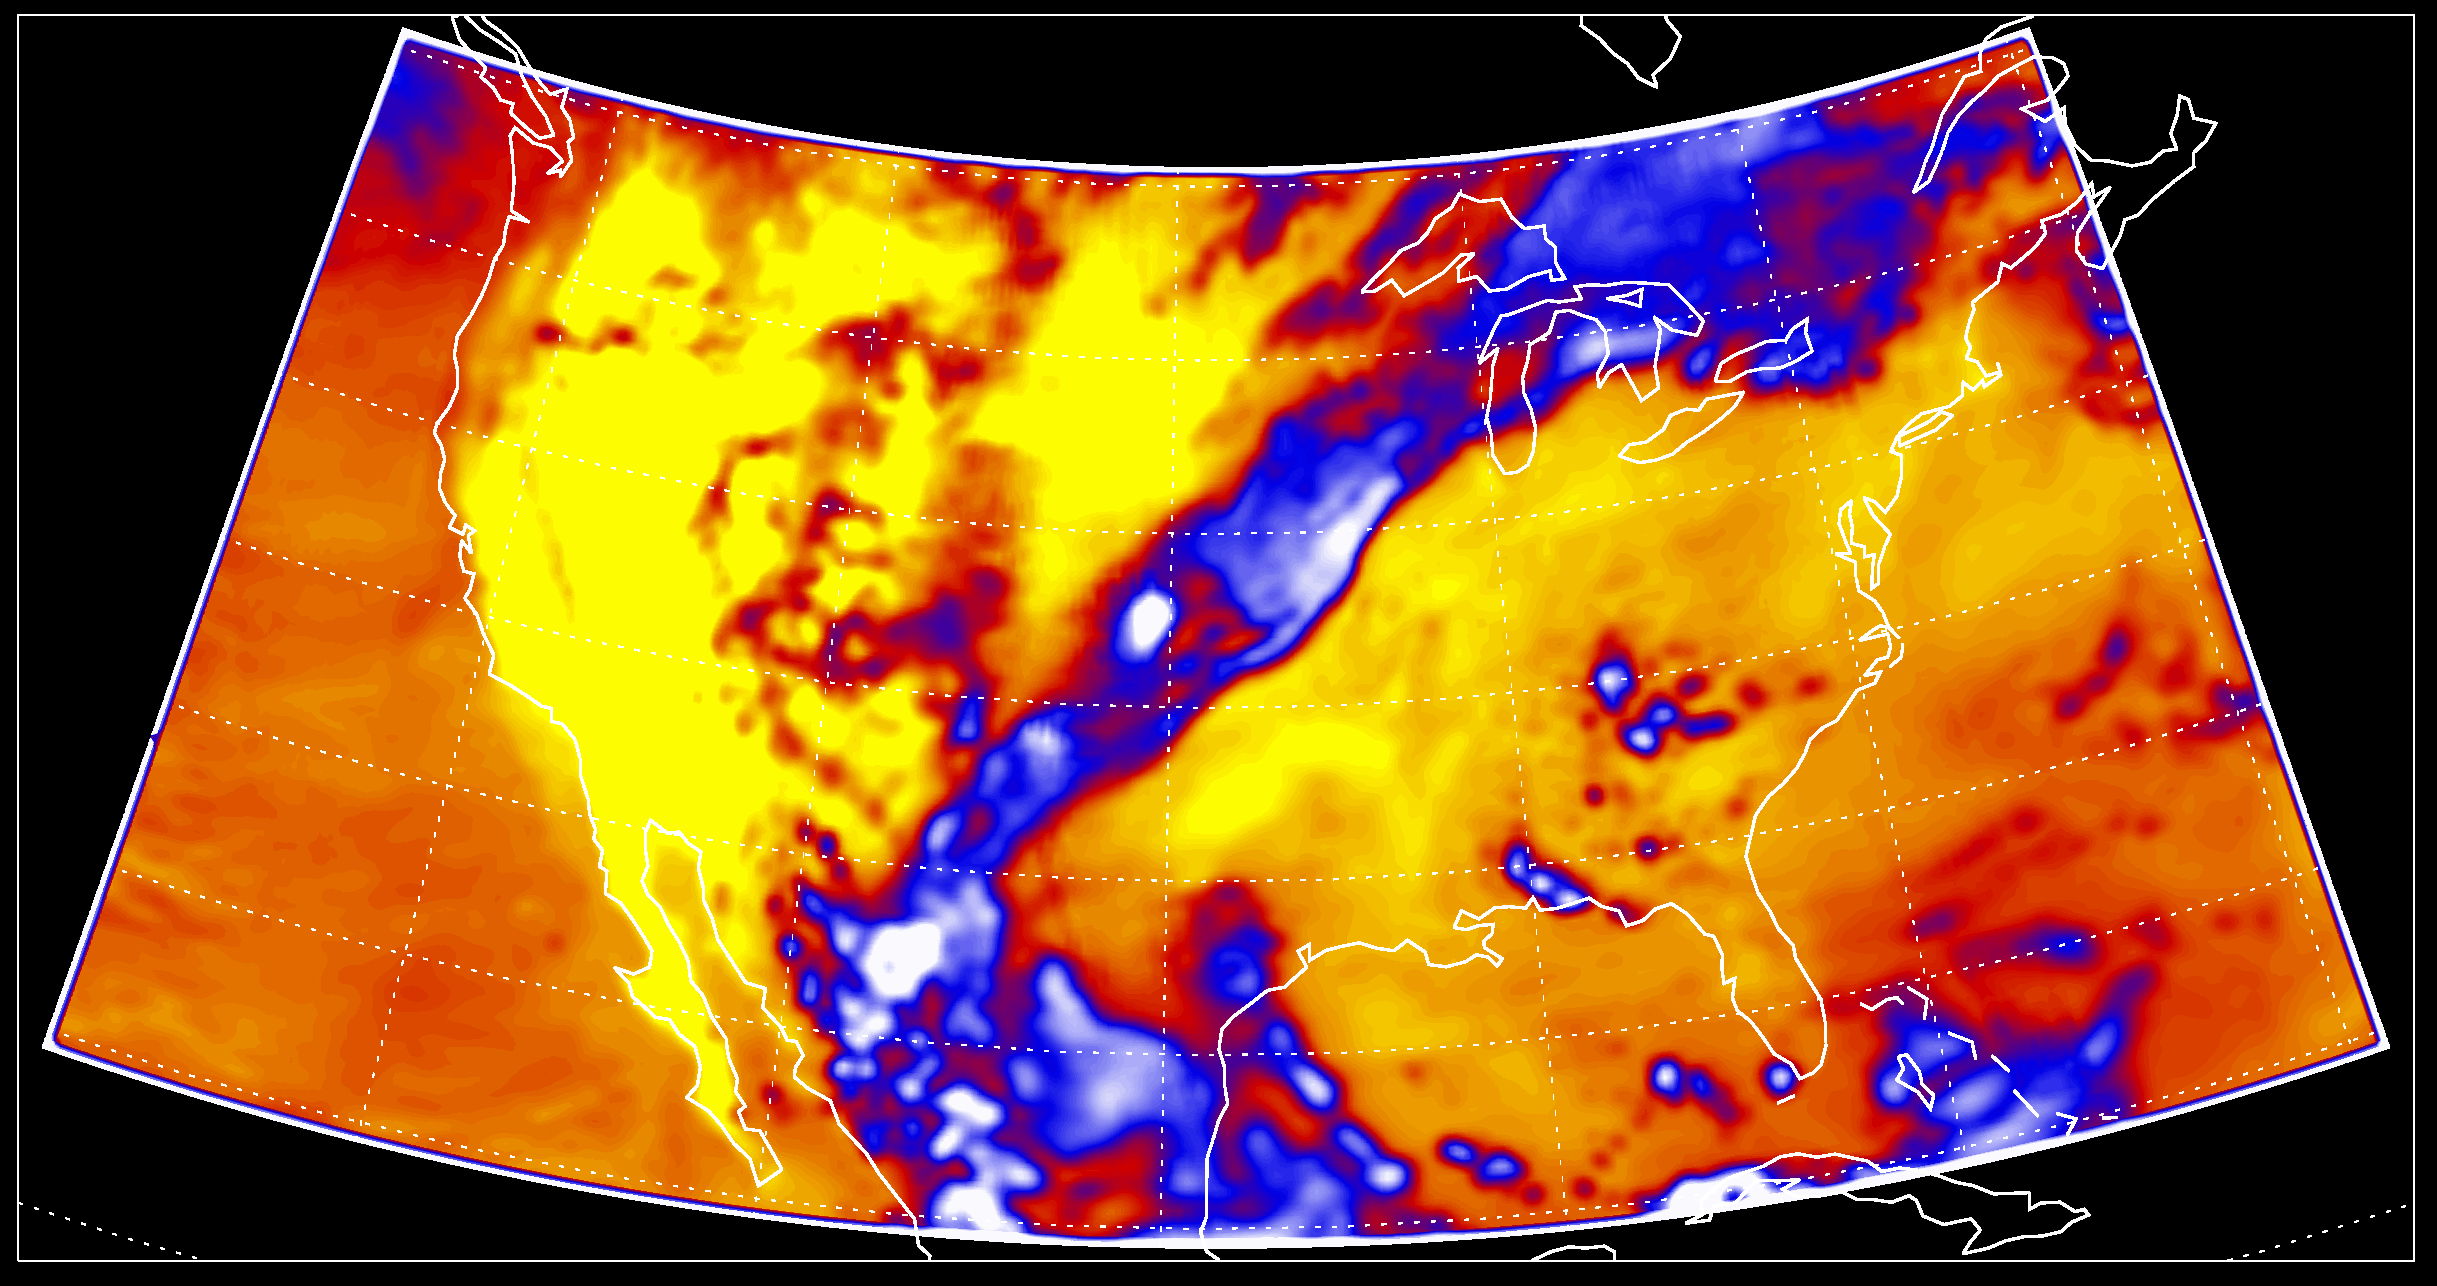 Oppressive Heat Wave Moves across United States Image of the Day